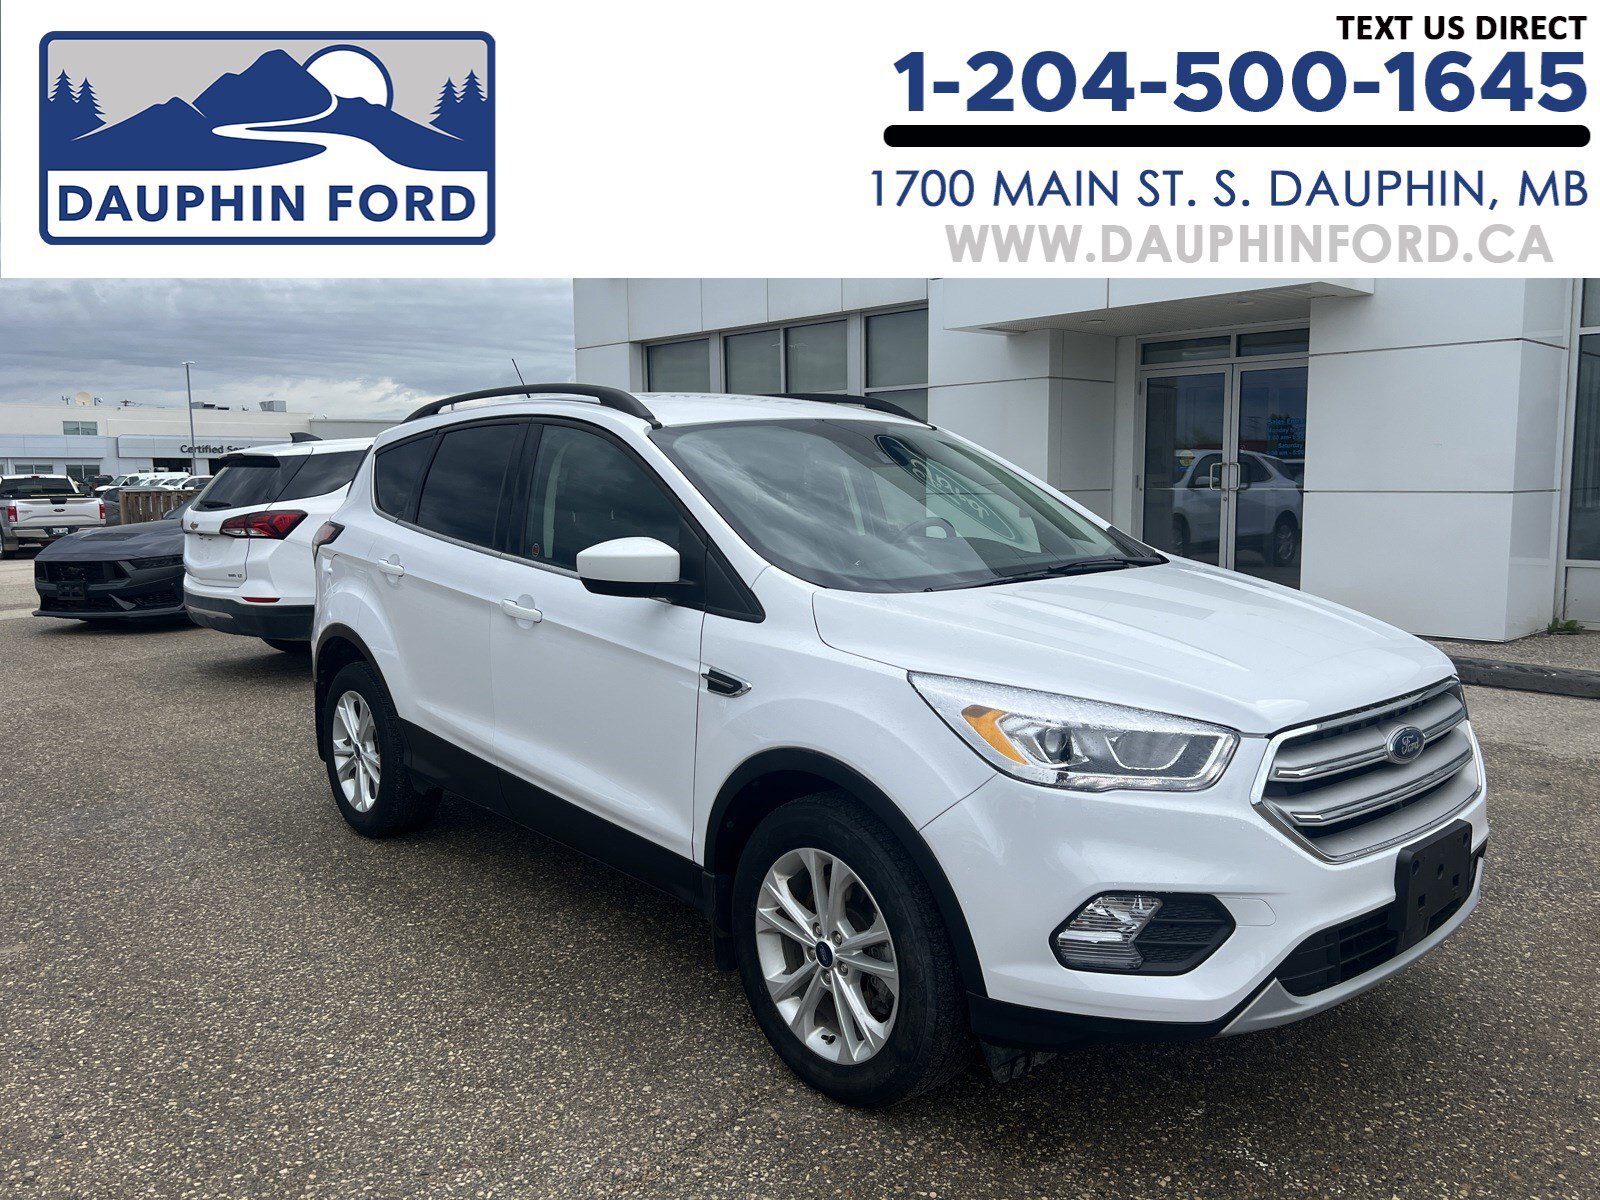 2018 Ford Escape SEL Leather Heated Seats/Remote Start/Lane Keep Sy